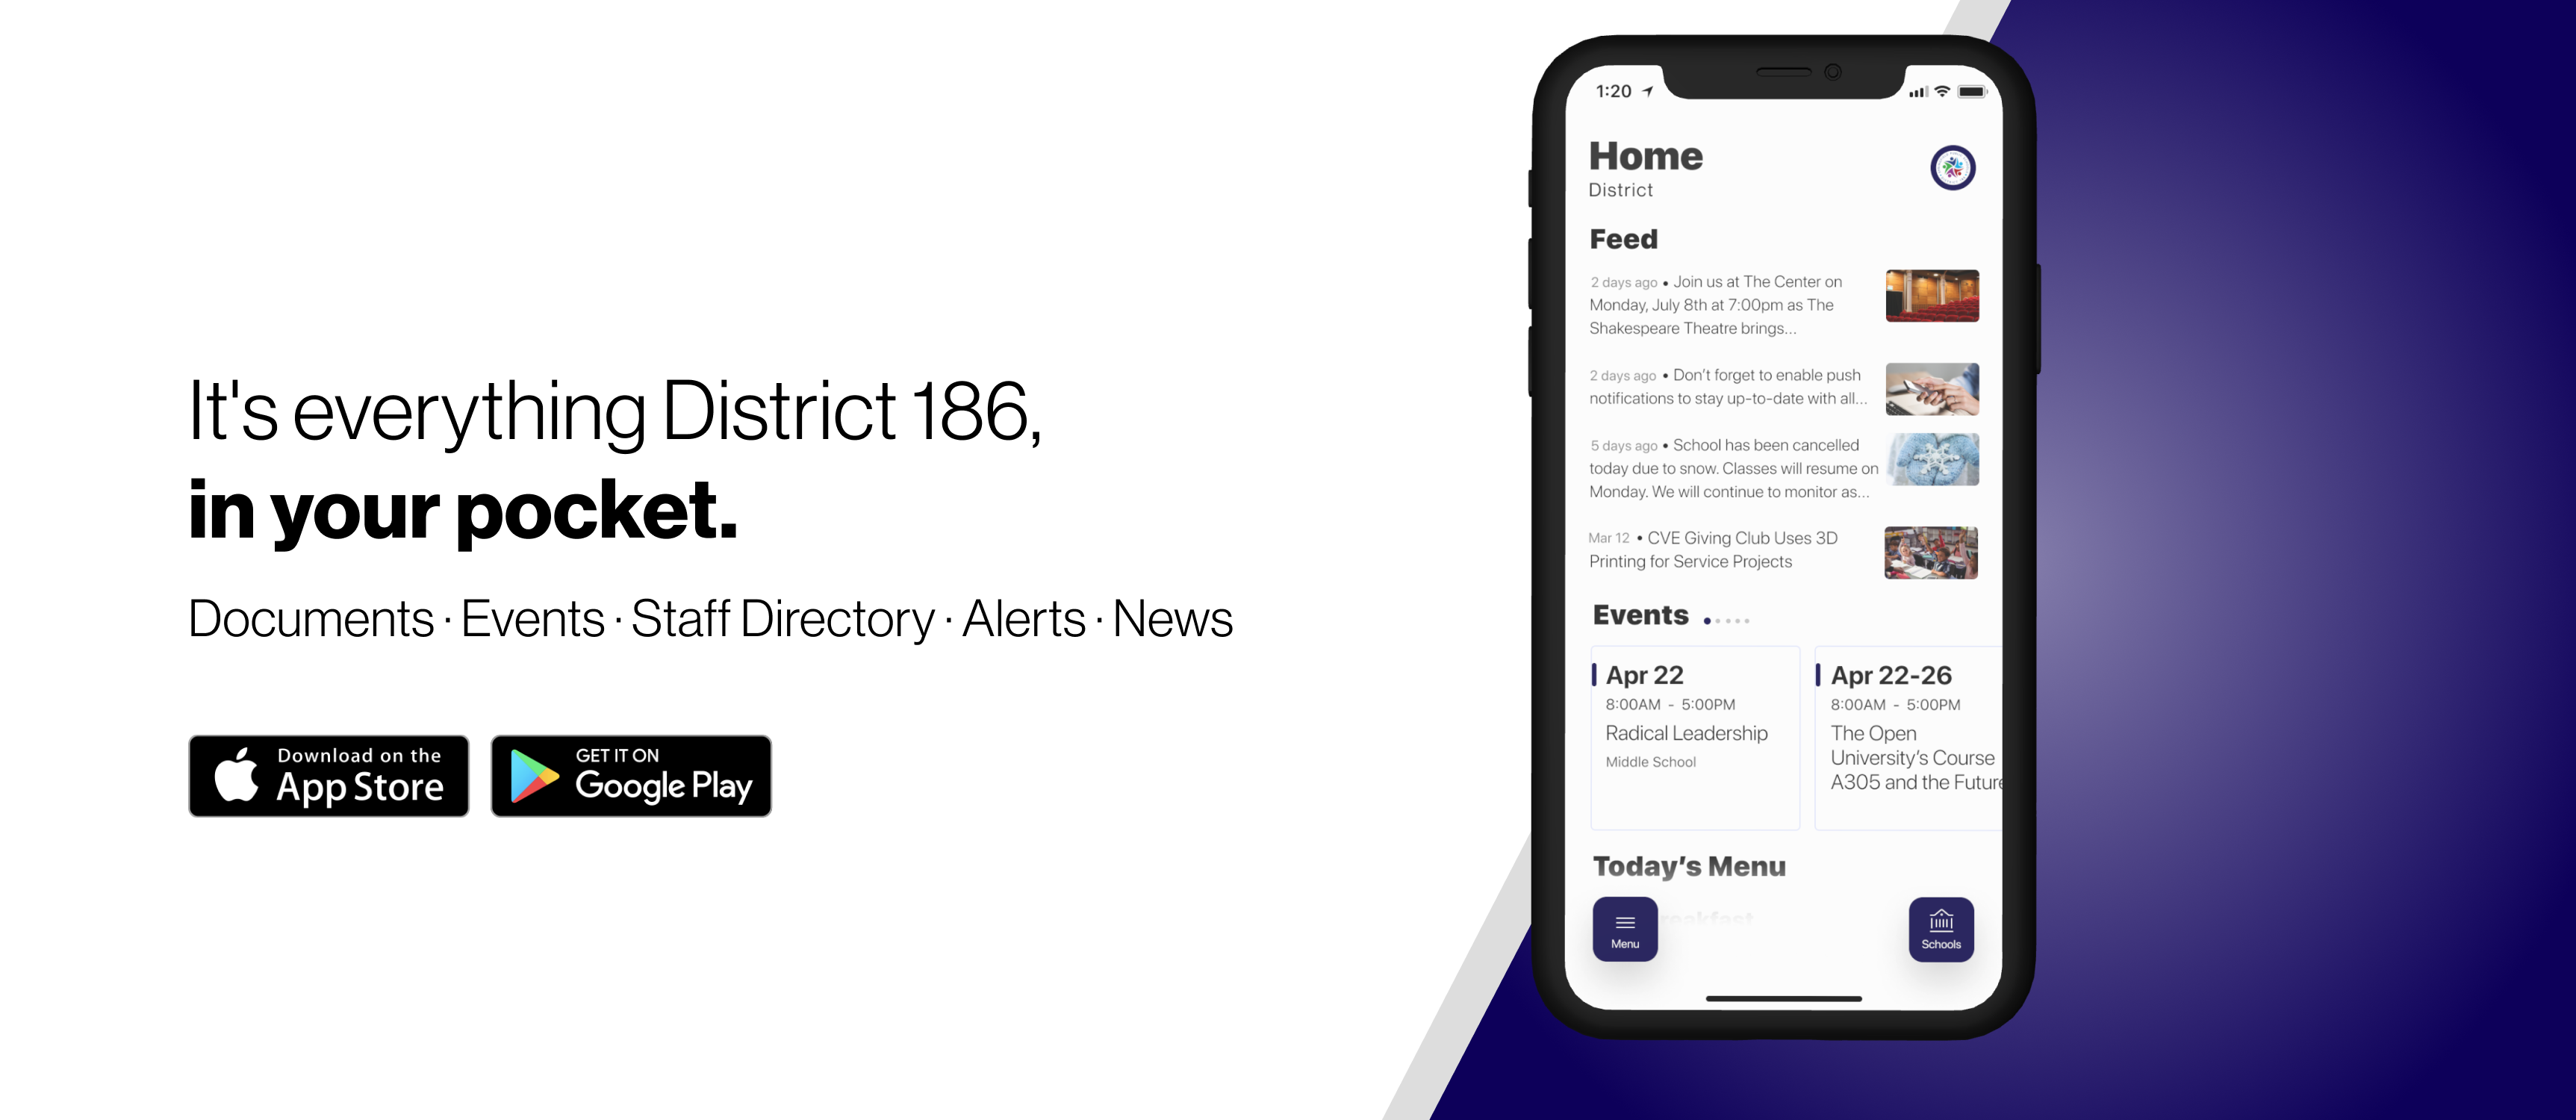 Its everything District 186 in your pocket. Download the app graphic. 